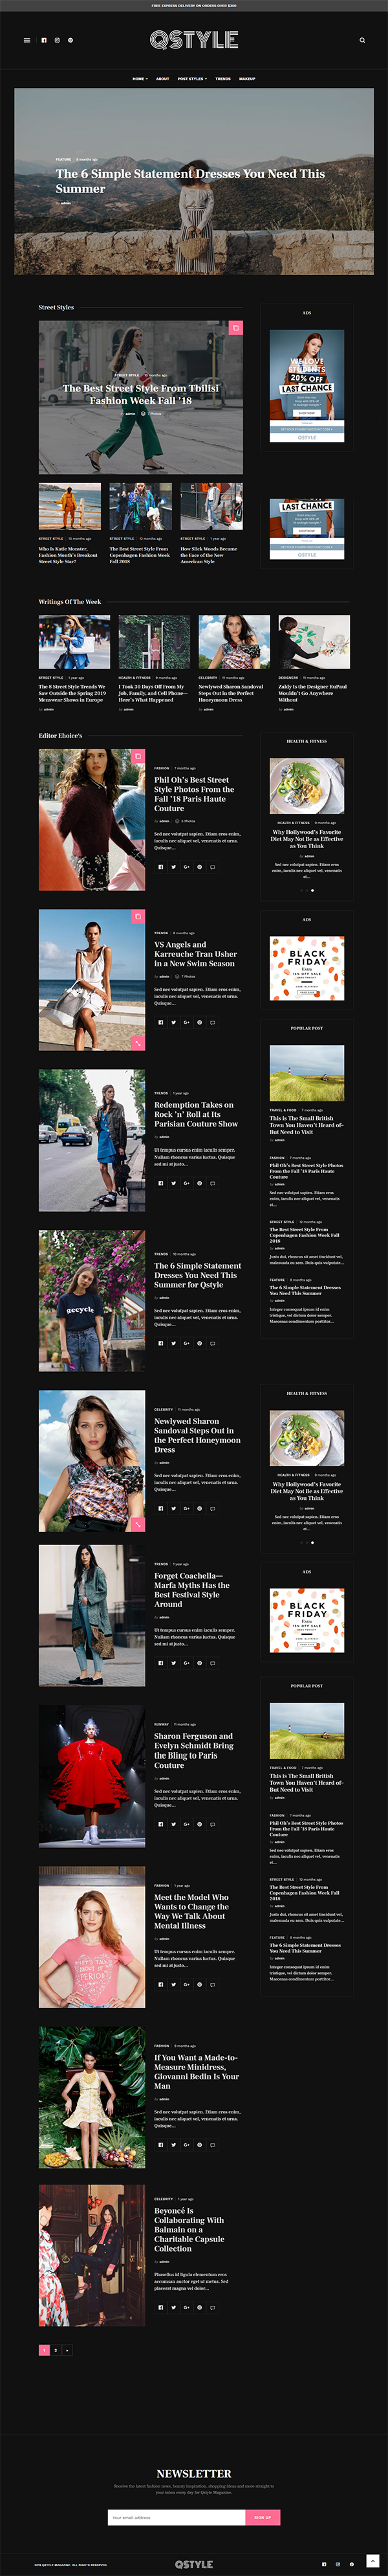 Qstyle - A WordPress Theme For Bloggers